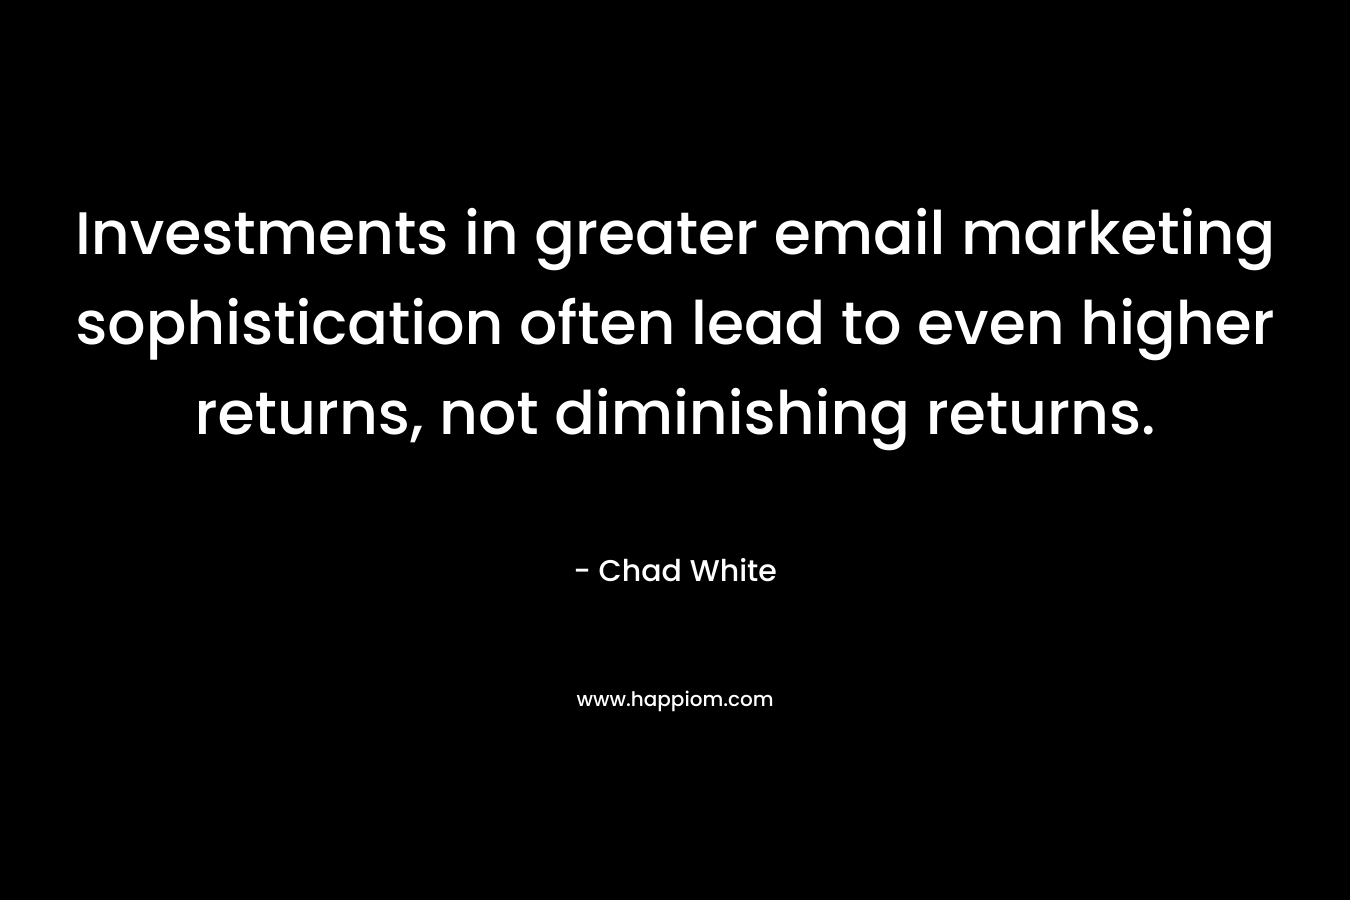 Investments in greater email marketing sophistication often lead to even higher returns, not diminishing returns.